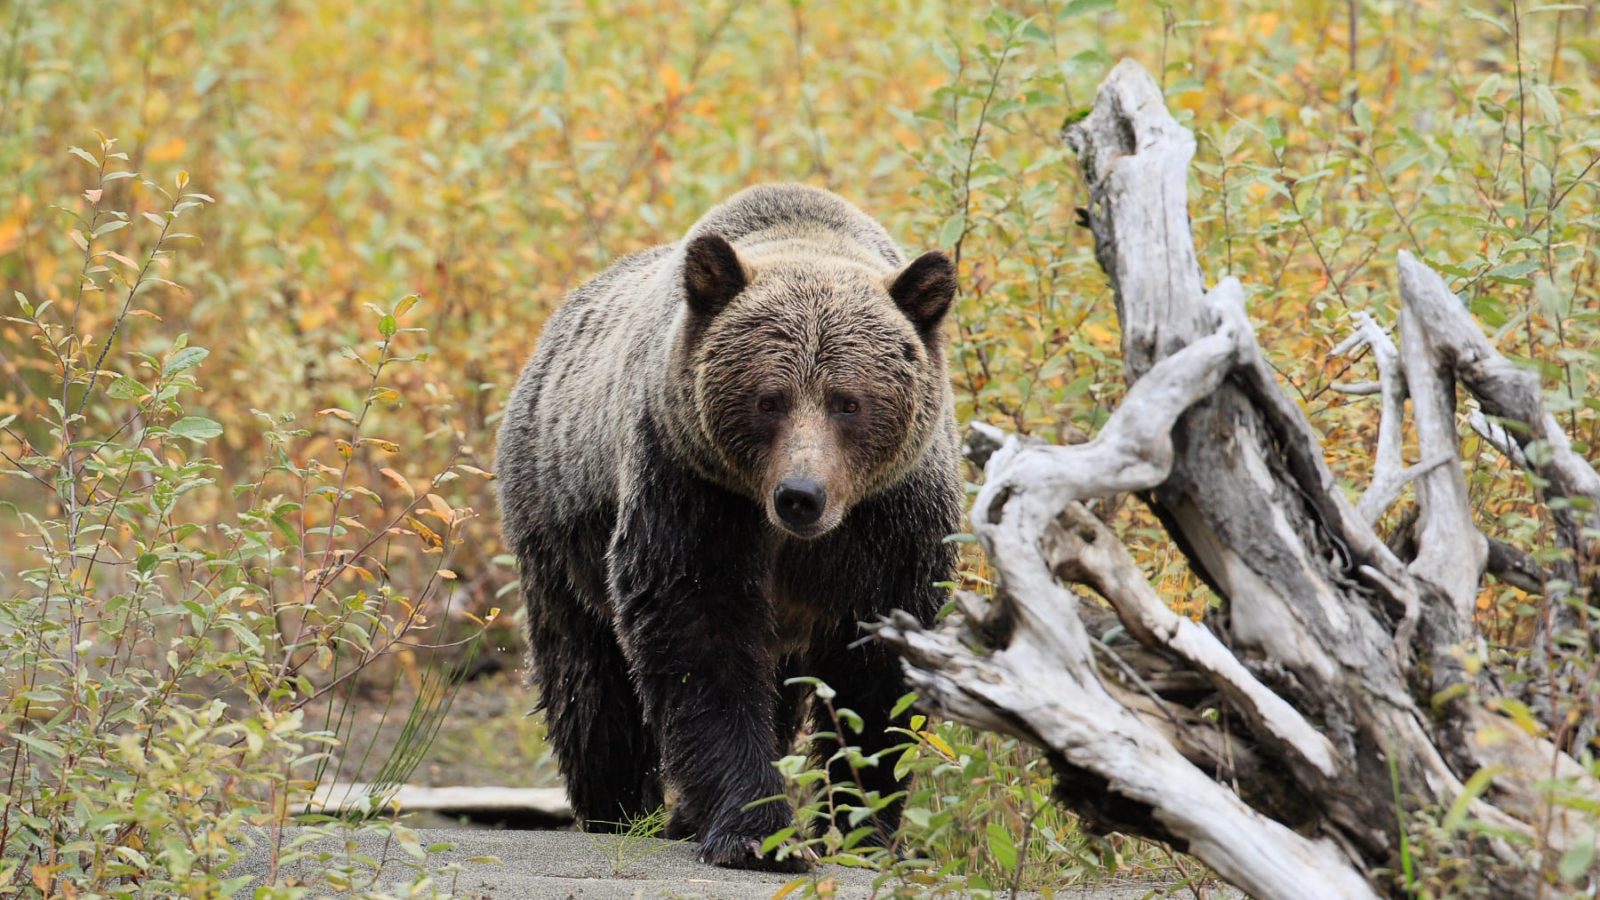 Grizzly-viewing at Wild Bear Lodge